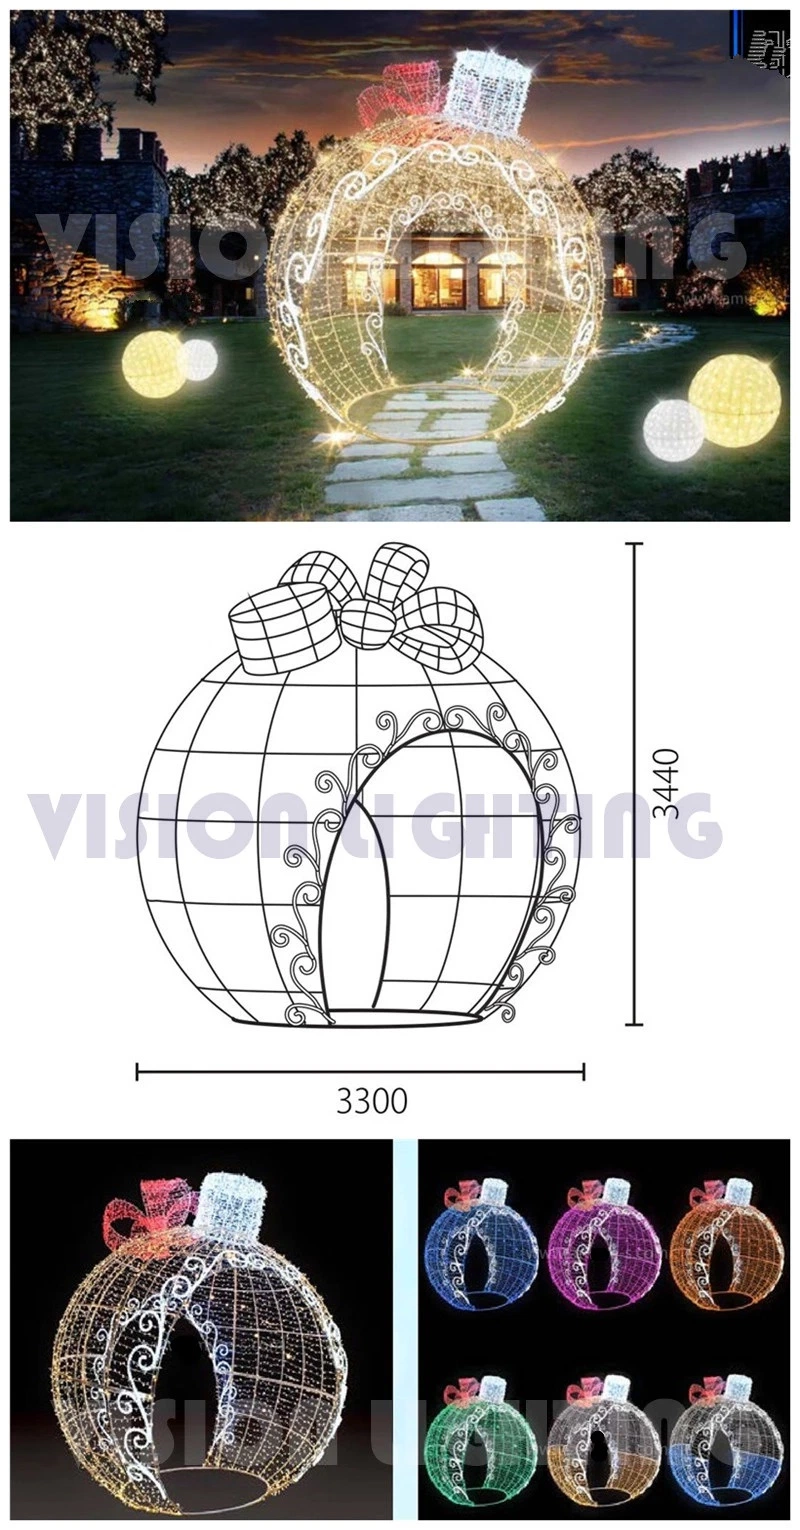 Decorative LED Large Outdoor Christmas Lighted Ball Ornaments Big 3D Baubles Motif